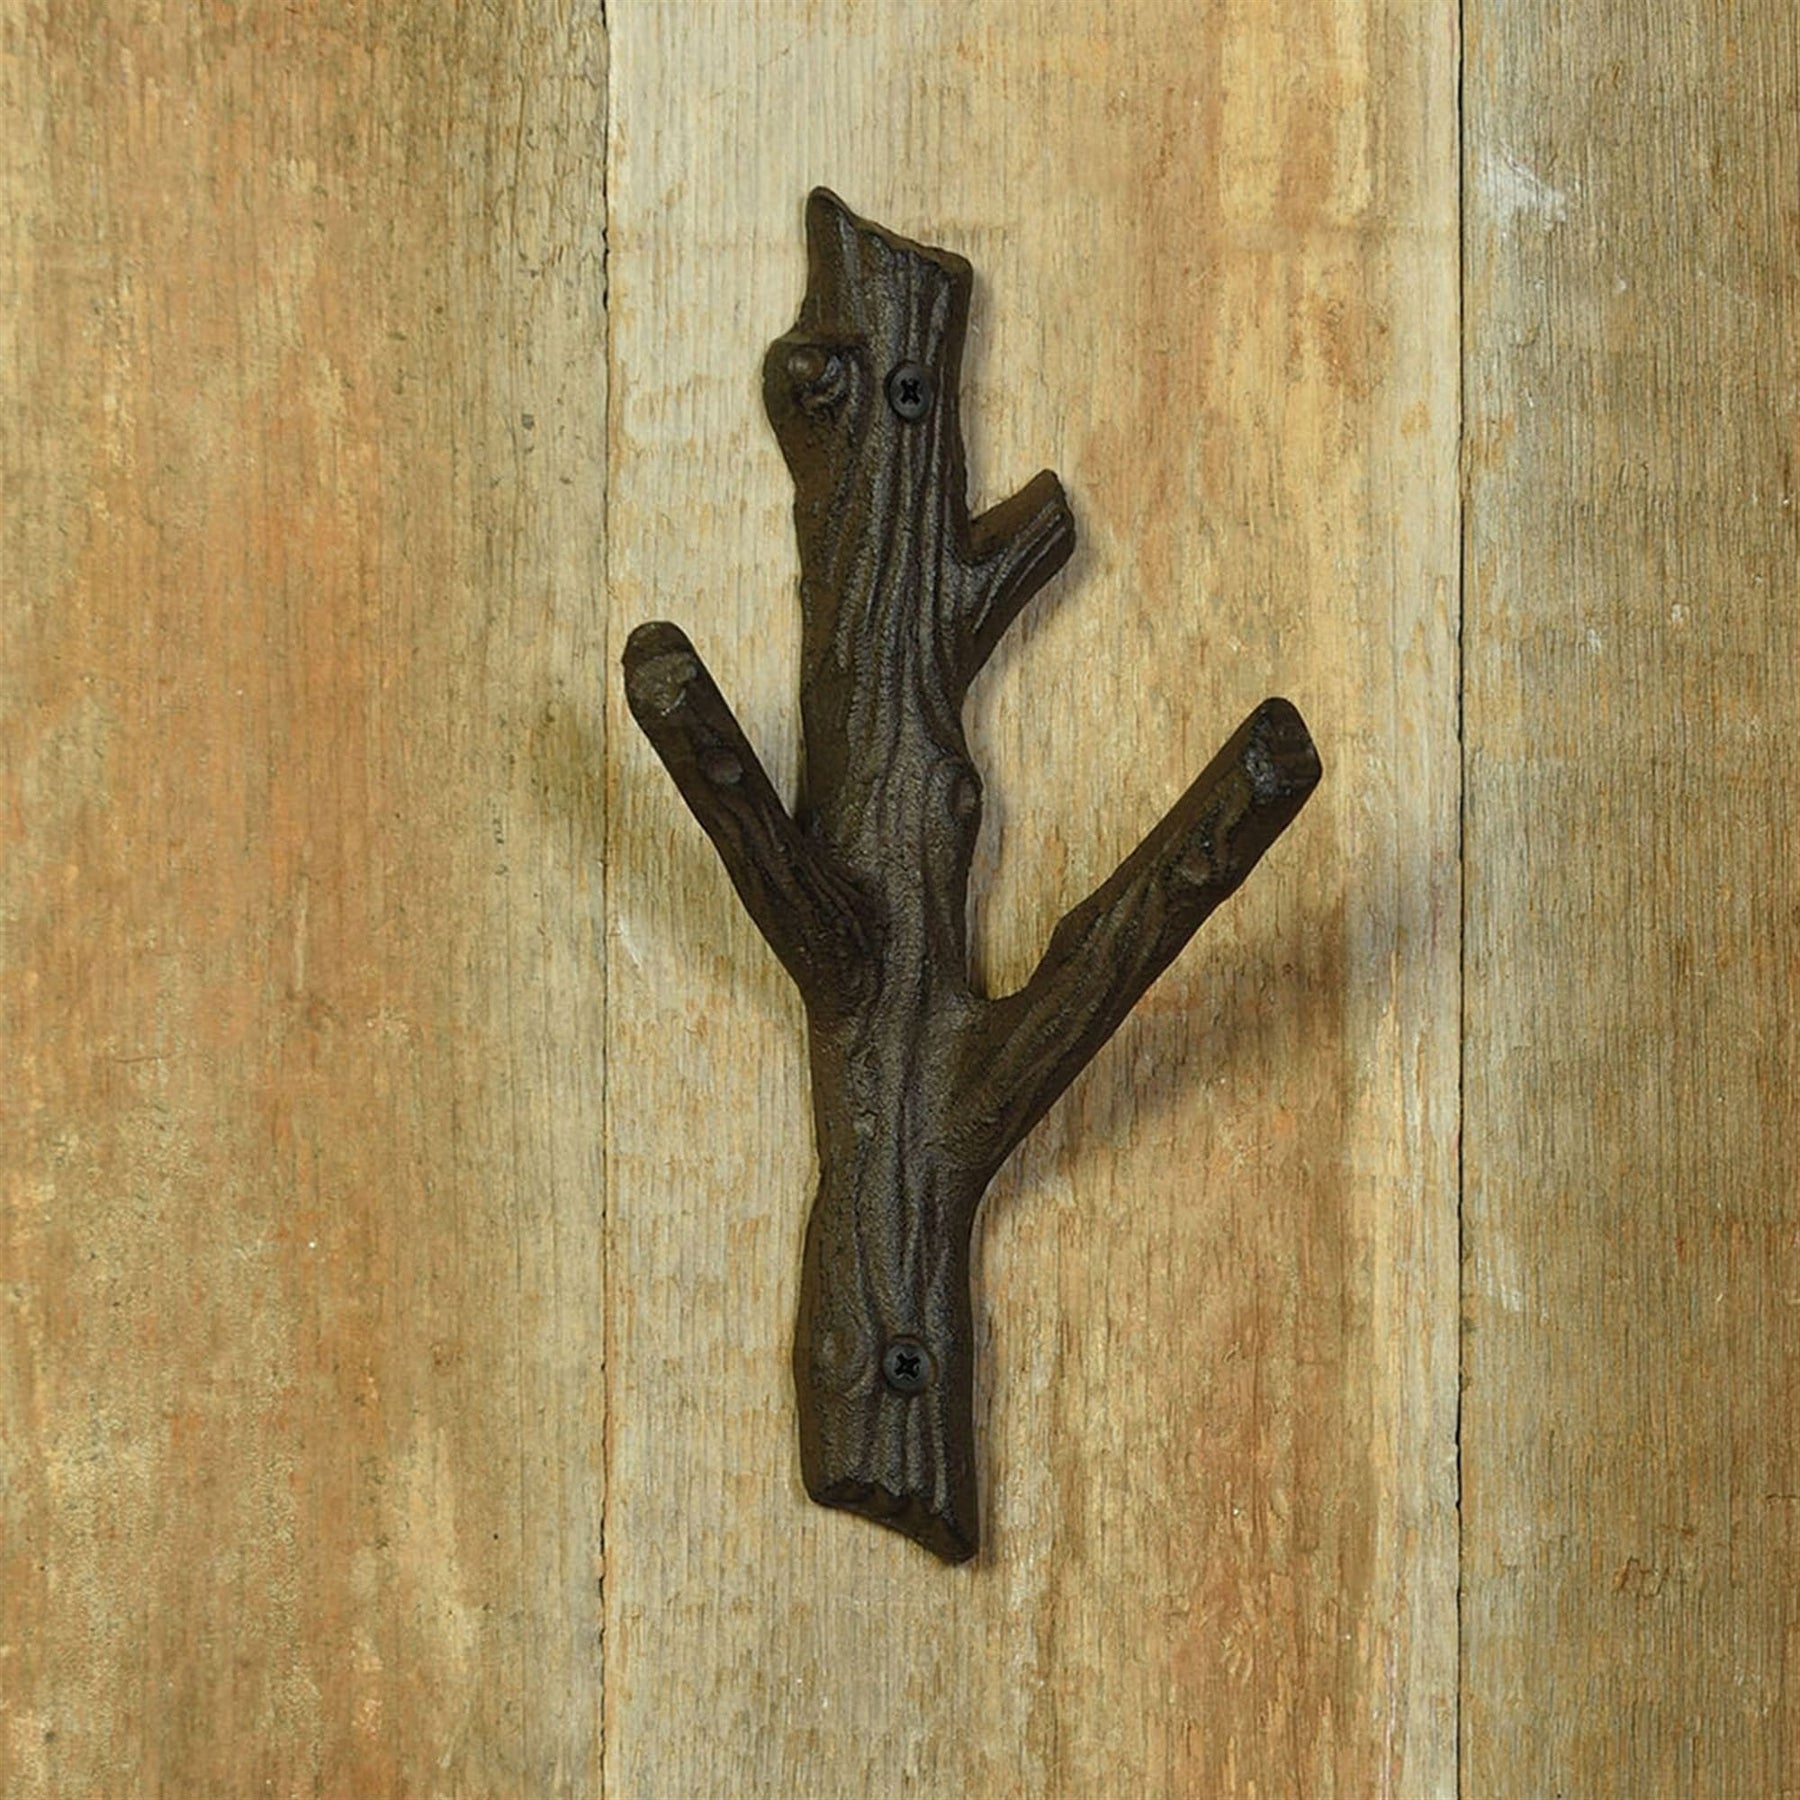 Cast Iron 8 Inch Tree Branch Wall Hook - Set of 4 3142-13 – Moveable Home